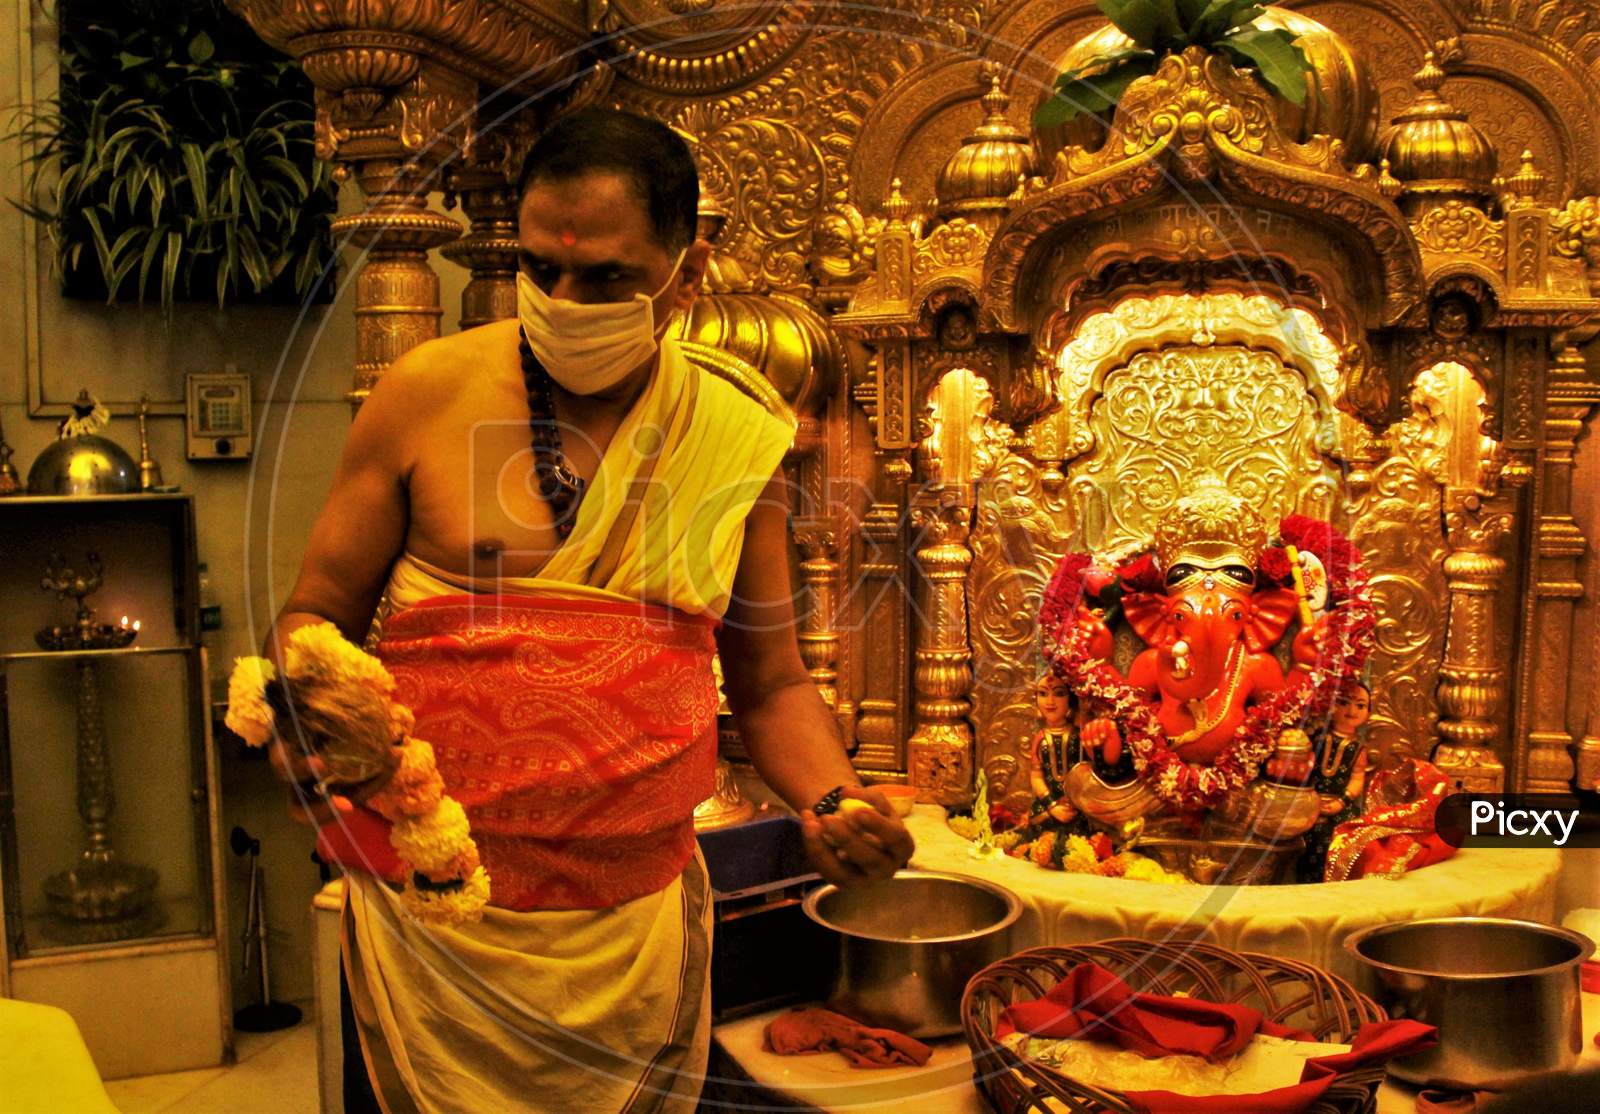 A Hindu priest wearing a facemask amid concerns over the spread of the COVID-19, is seen standing next to an idol of Lord Ganesha, at a temple in Mumbai on March 13, 2020.